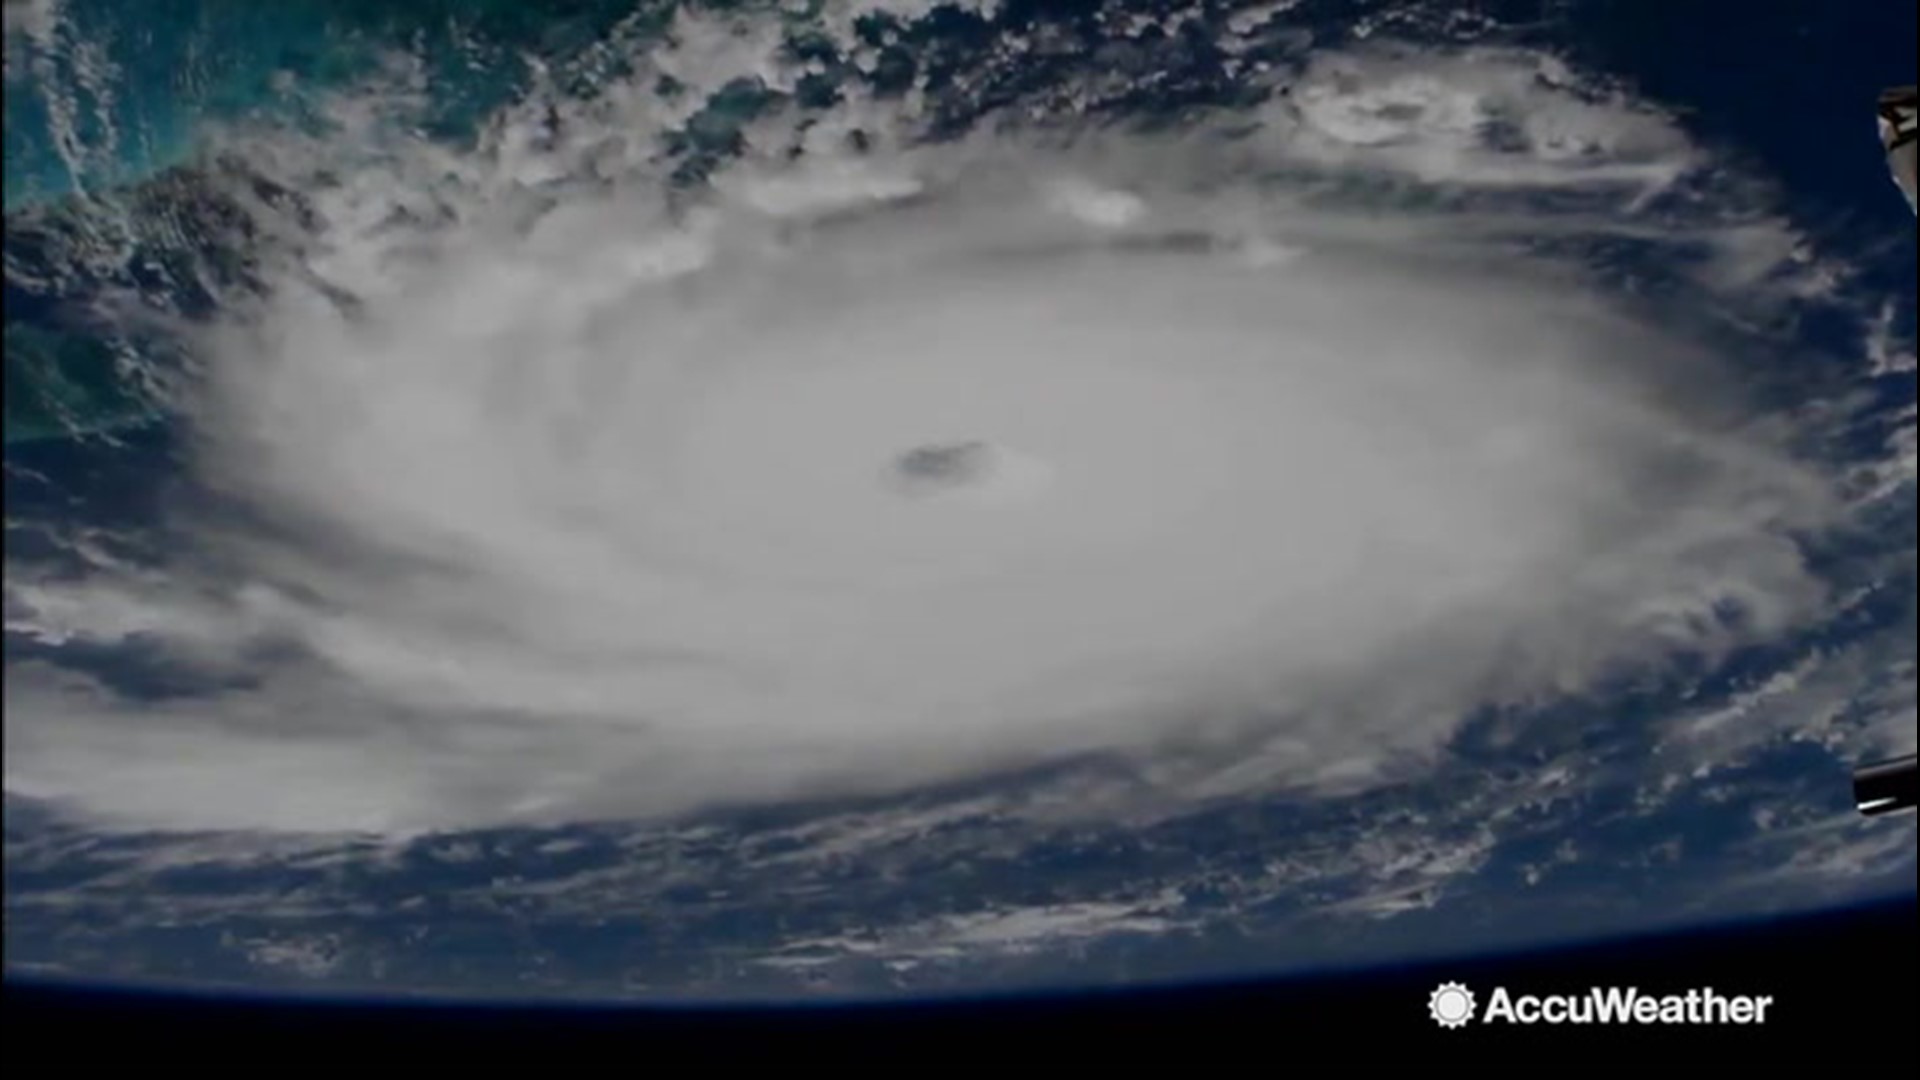 Hurricane Dorian becomes bigger and more dangerous by the day, but it can be hard to grasp the actual size of it without a visual. Luckily, the International Space Station filmed the hurricane from above on Sept. 1, revealing just how massive this hurricane is.